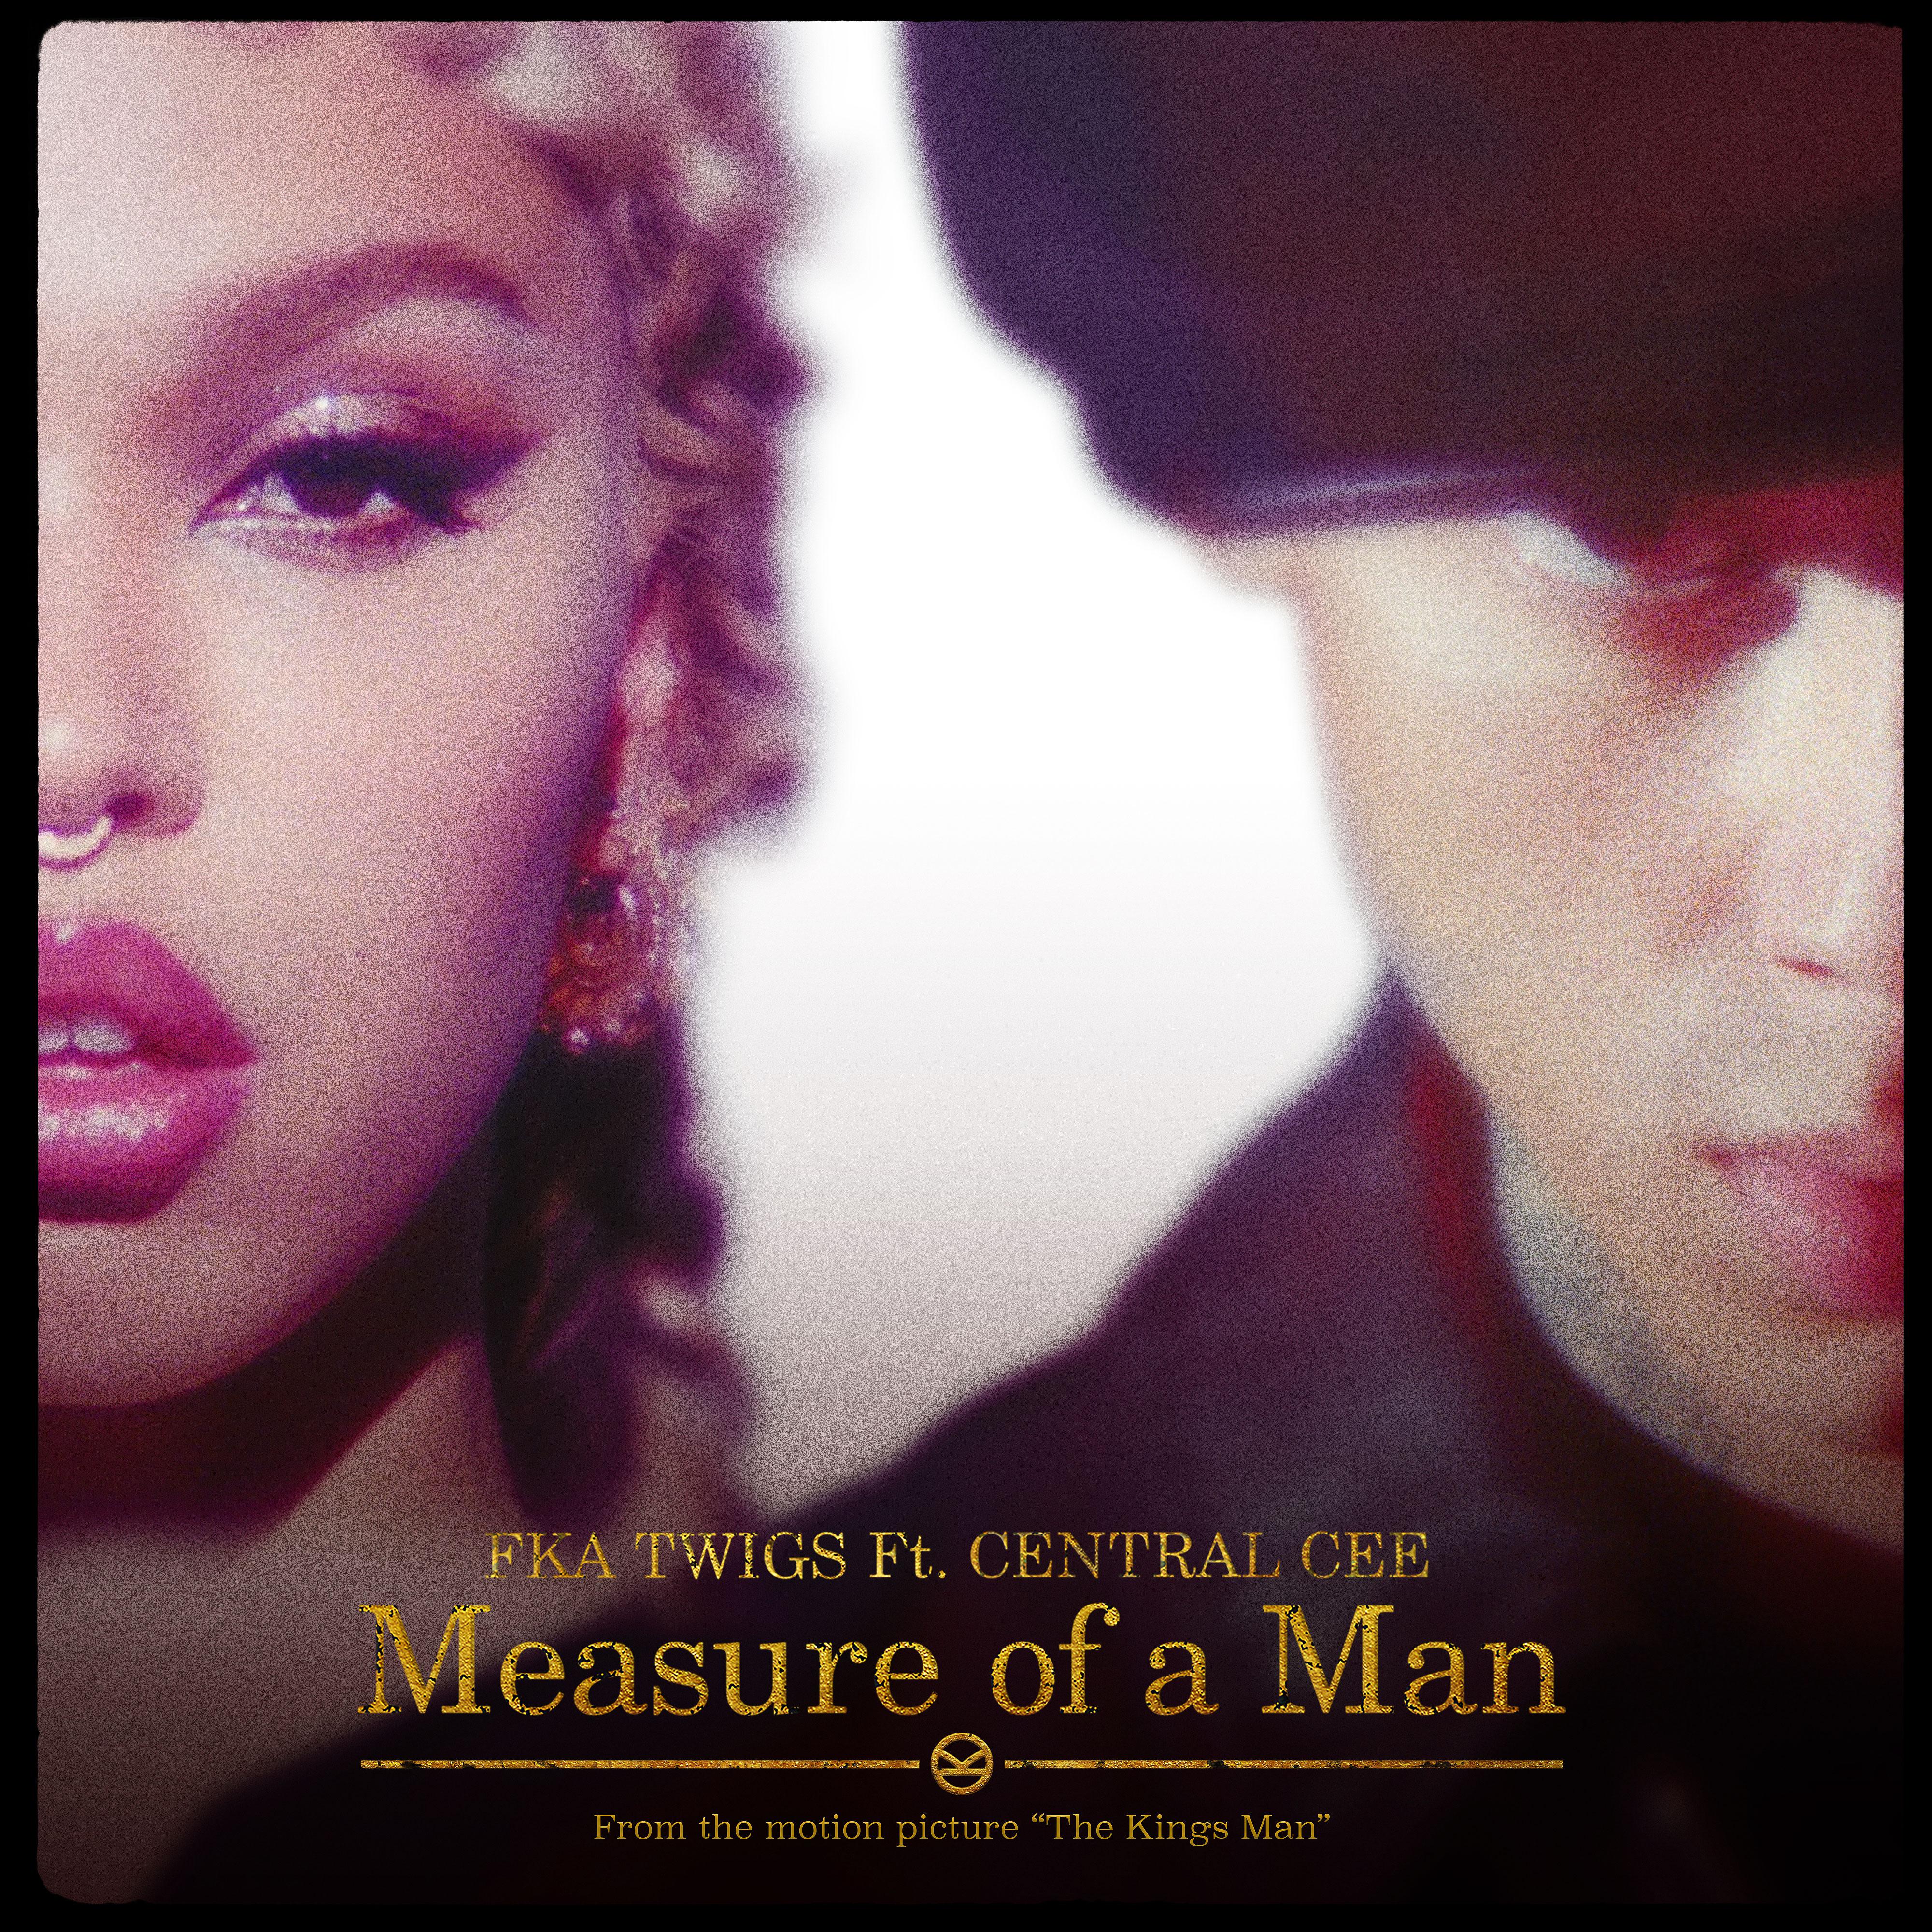 FKA twigs, Central Cee - Measure of a Man (feat. Central Cee)